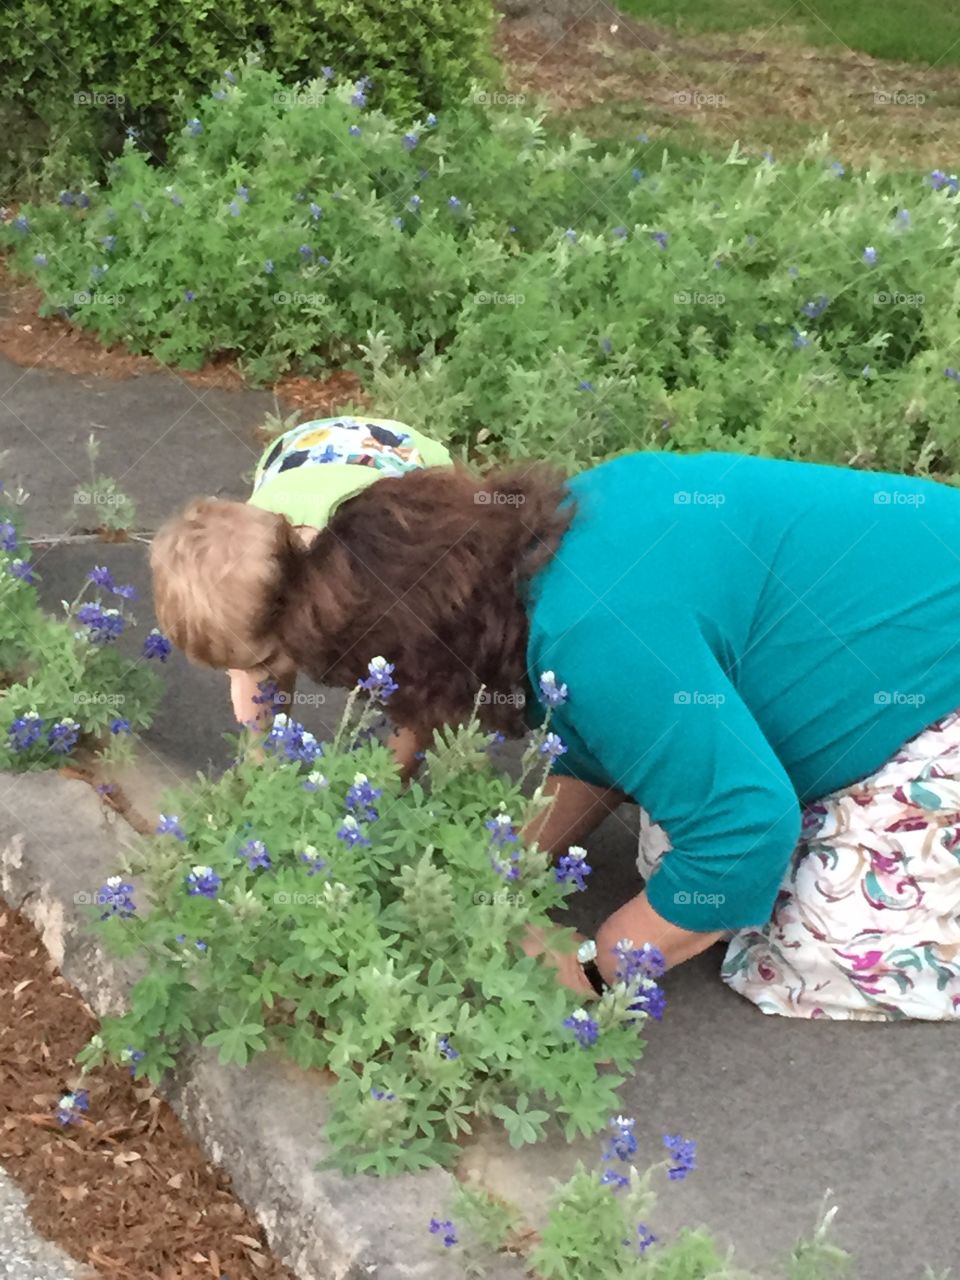 My mom and nephew smelling the bluebonnets 